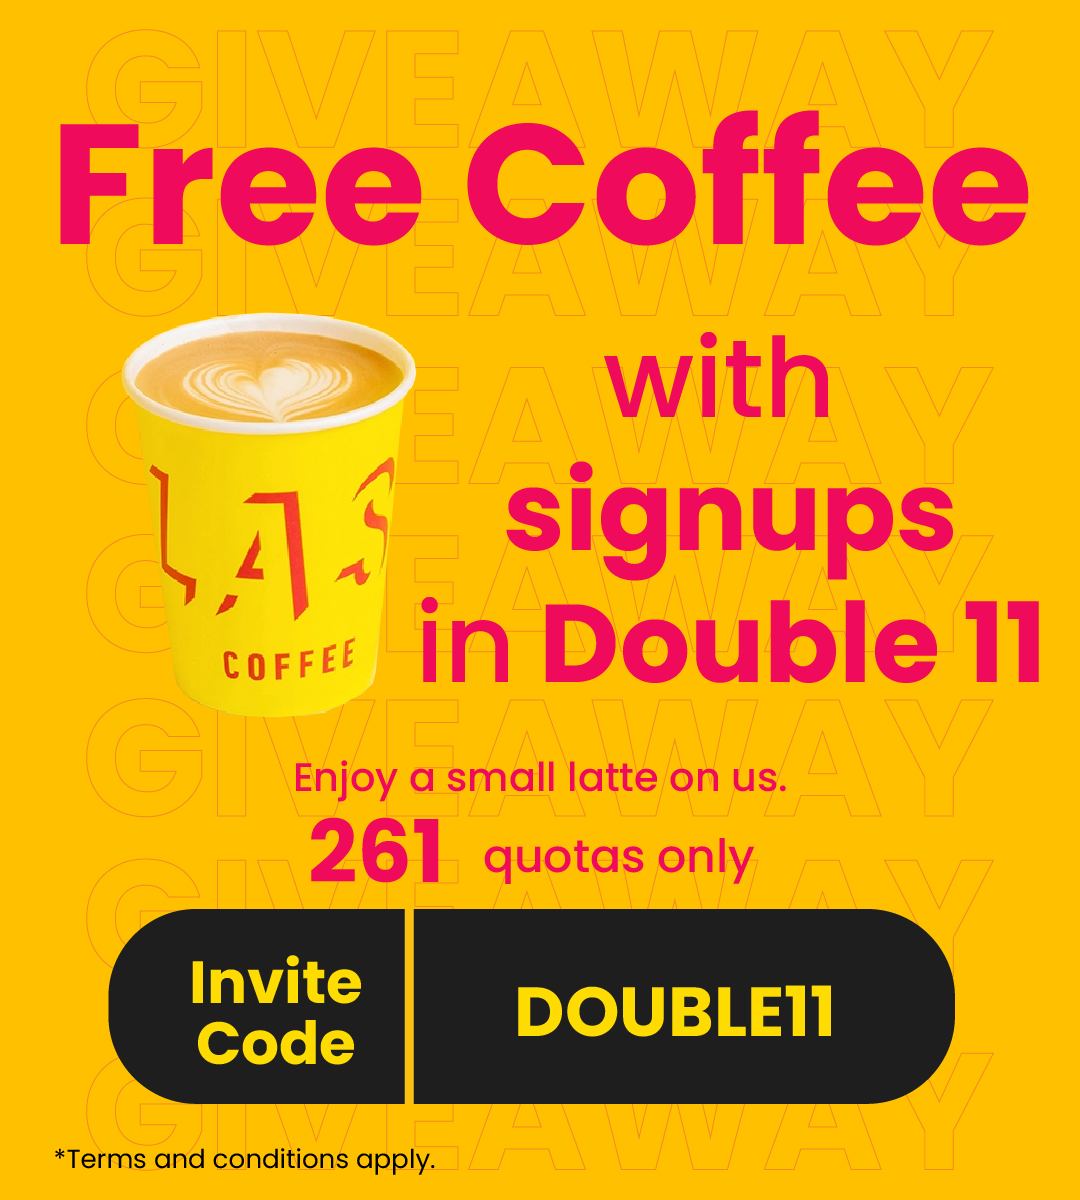 New Member Exclusive: Free Latte at Flash Coffee & S$4 voucher code